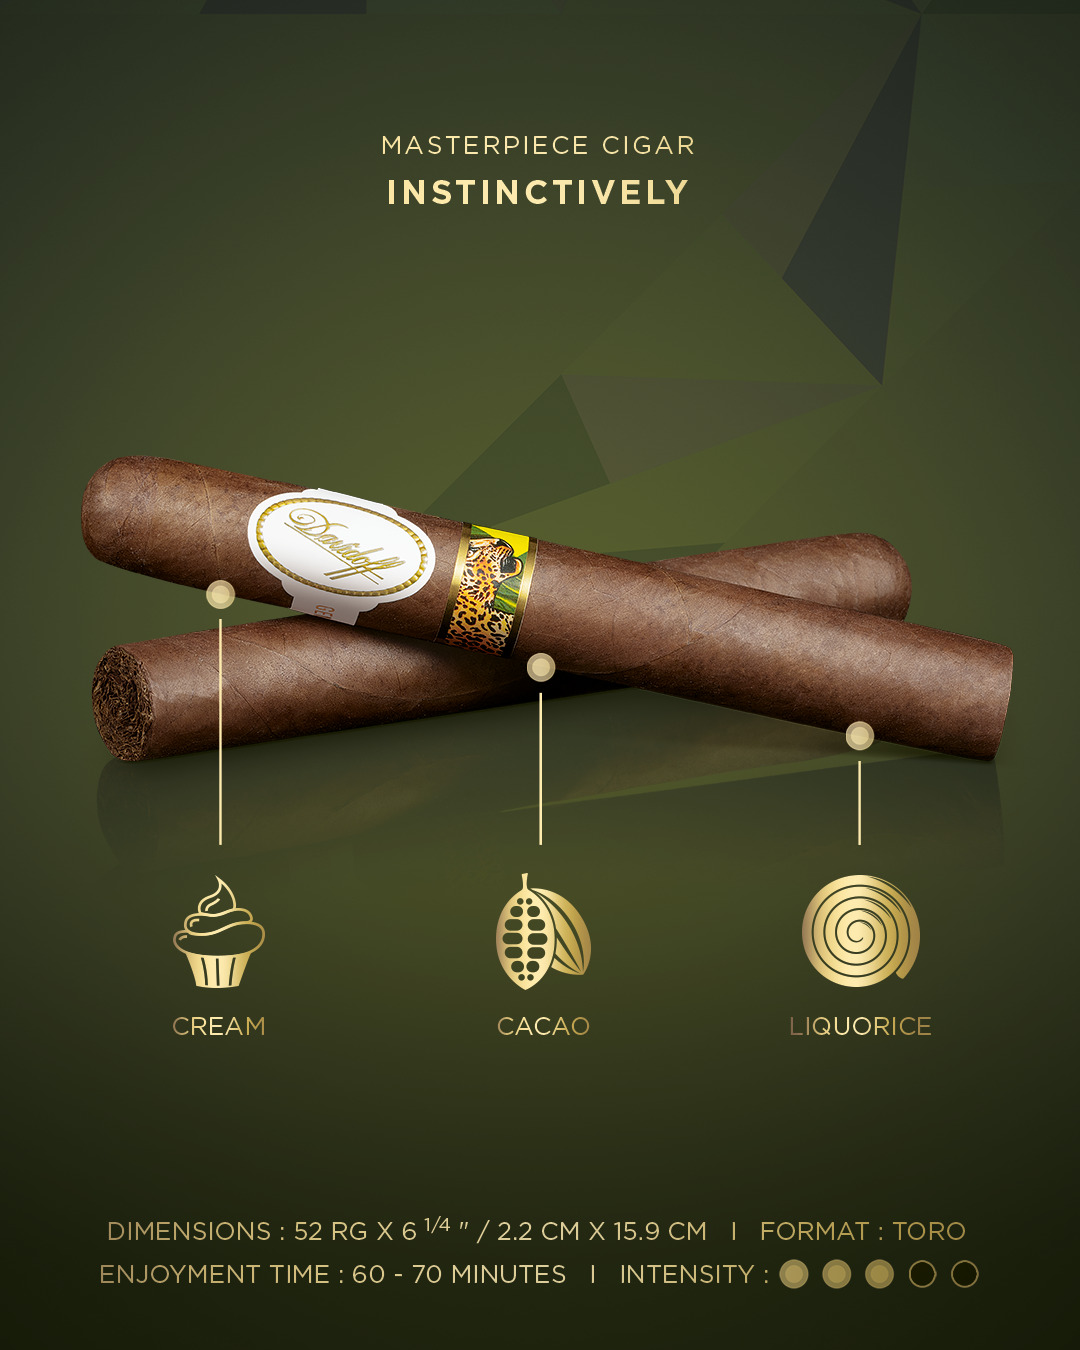 Two toro cigars which come with the Davidoff & Boyarde Masterpiece Humidor Instinctively with blend details displayed, such as main aromas, enjoyment time and intensity.